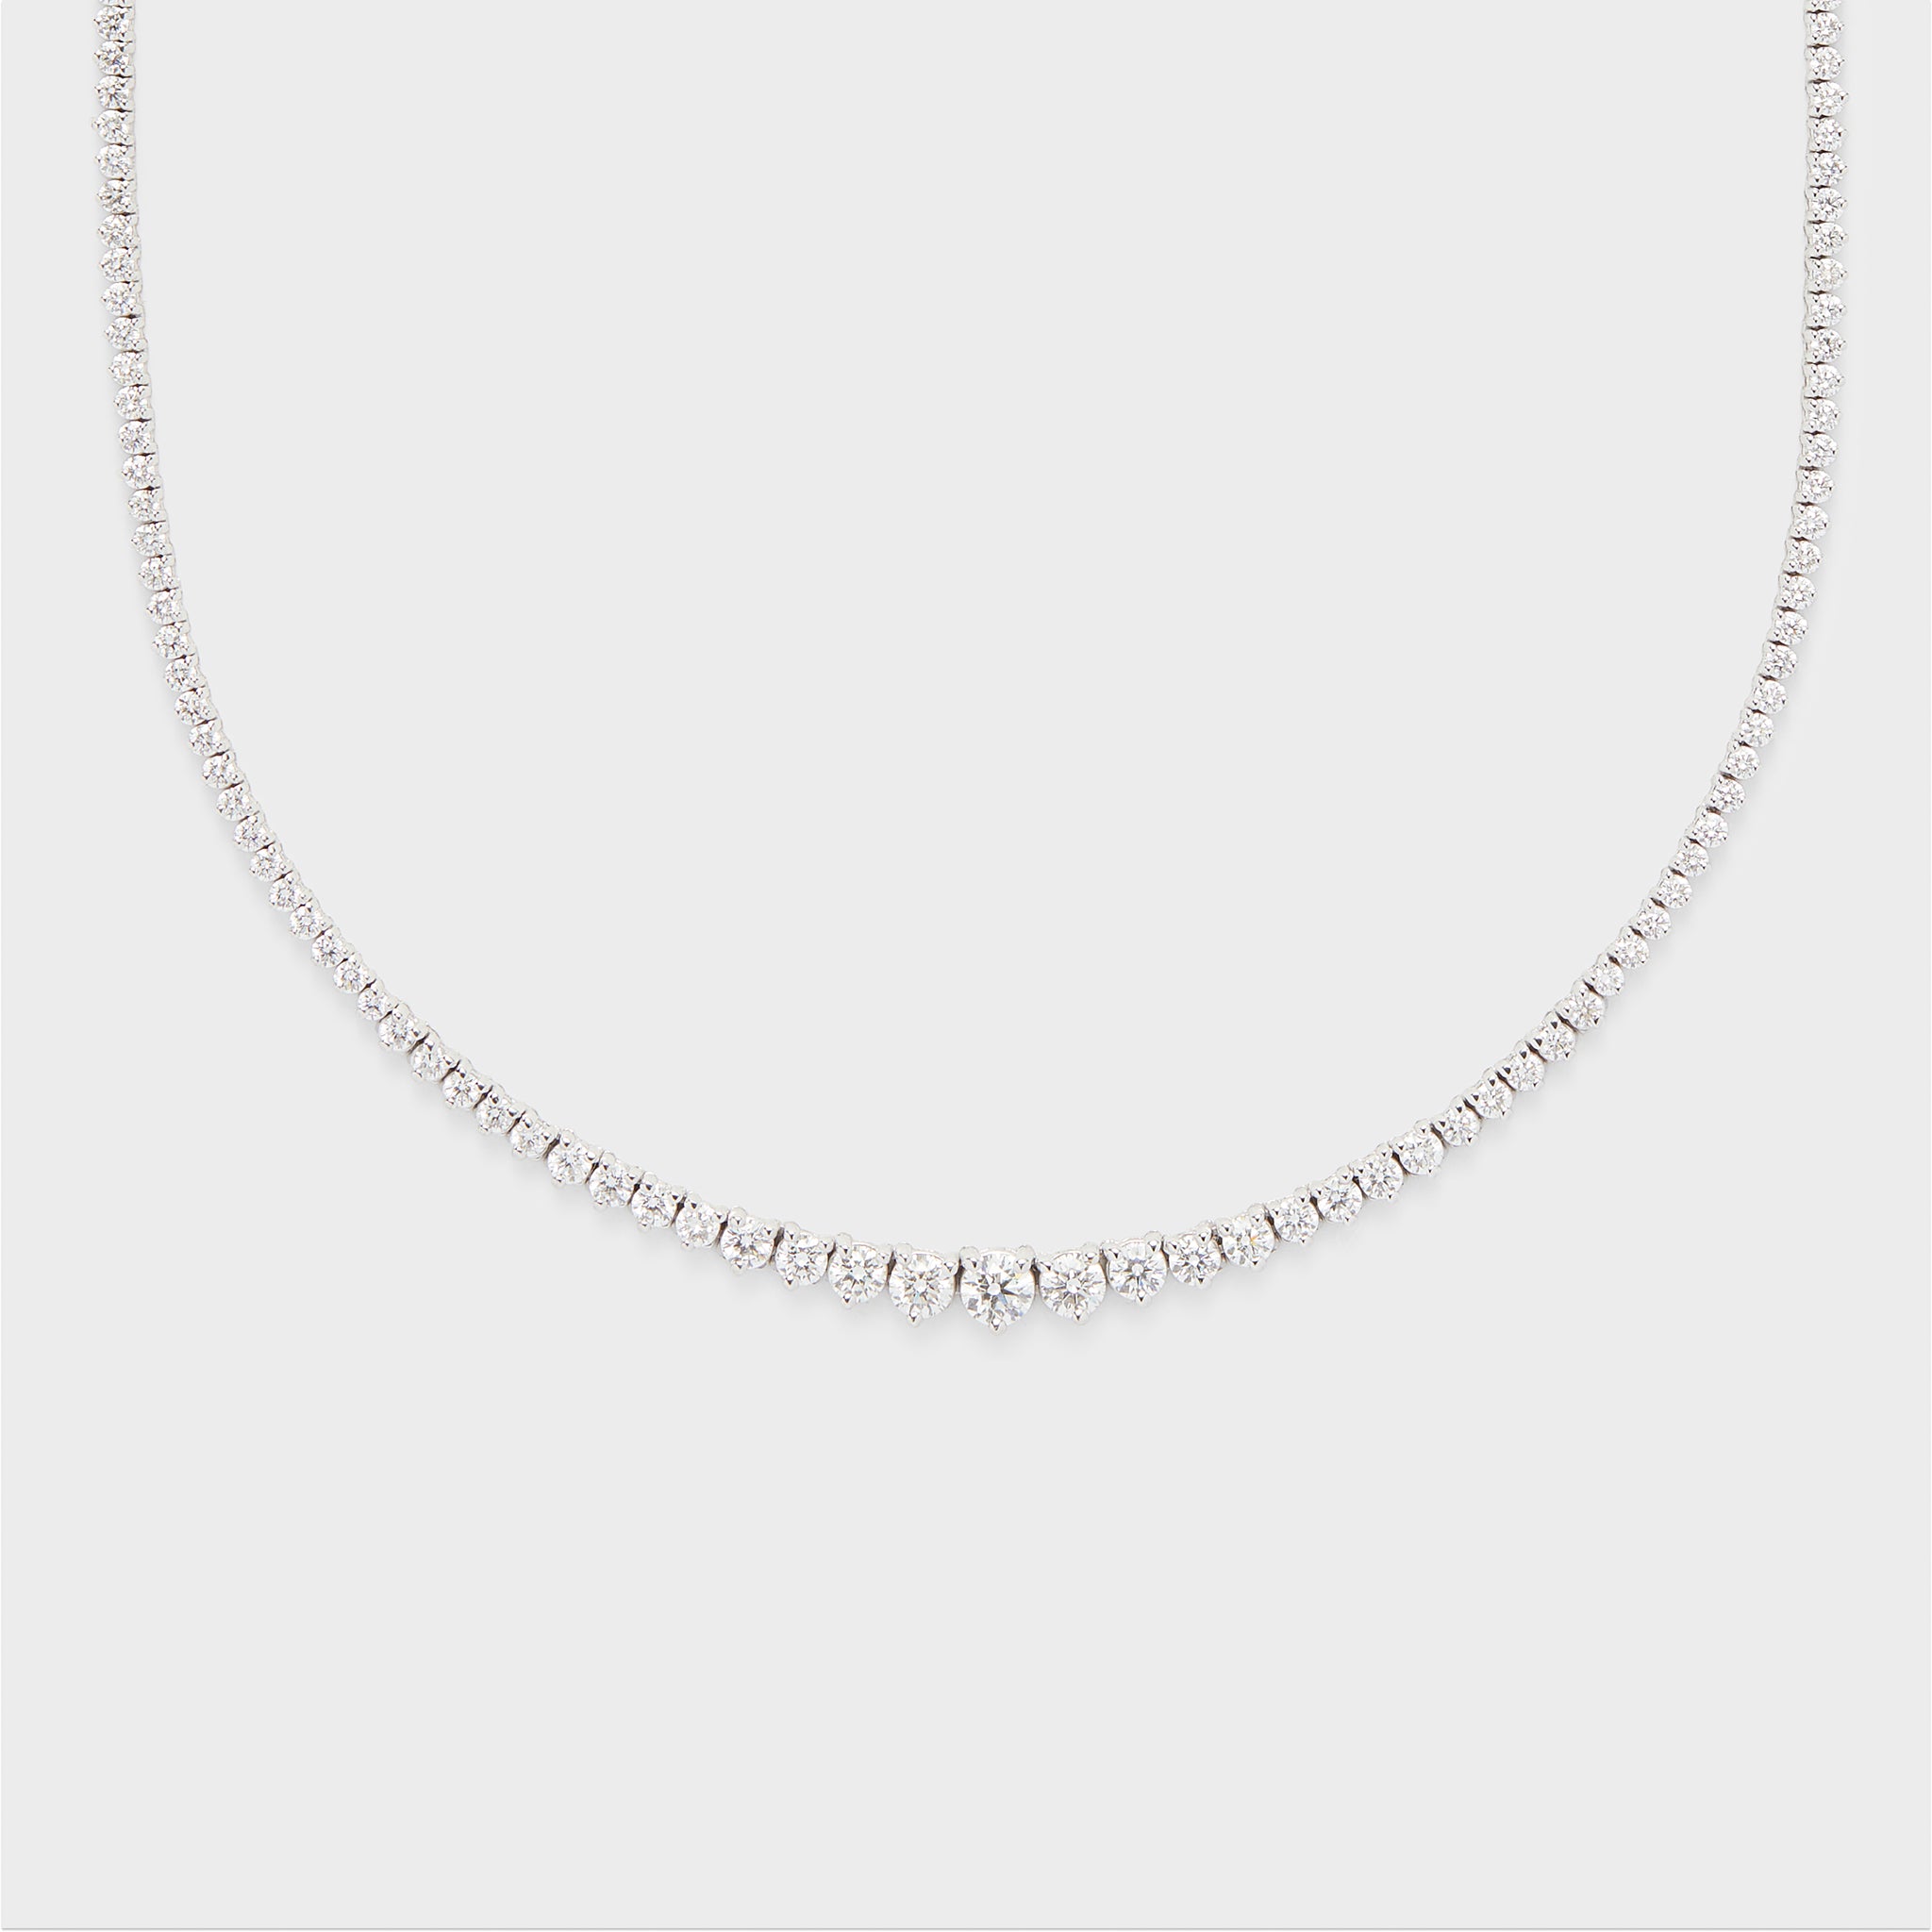 4 Prong Riviera Diamond Necklace In 18K 14K Yellow Gold White Gold Or  Platinum - Stevens Jewelers Inc